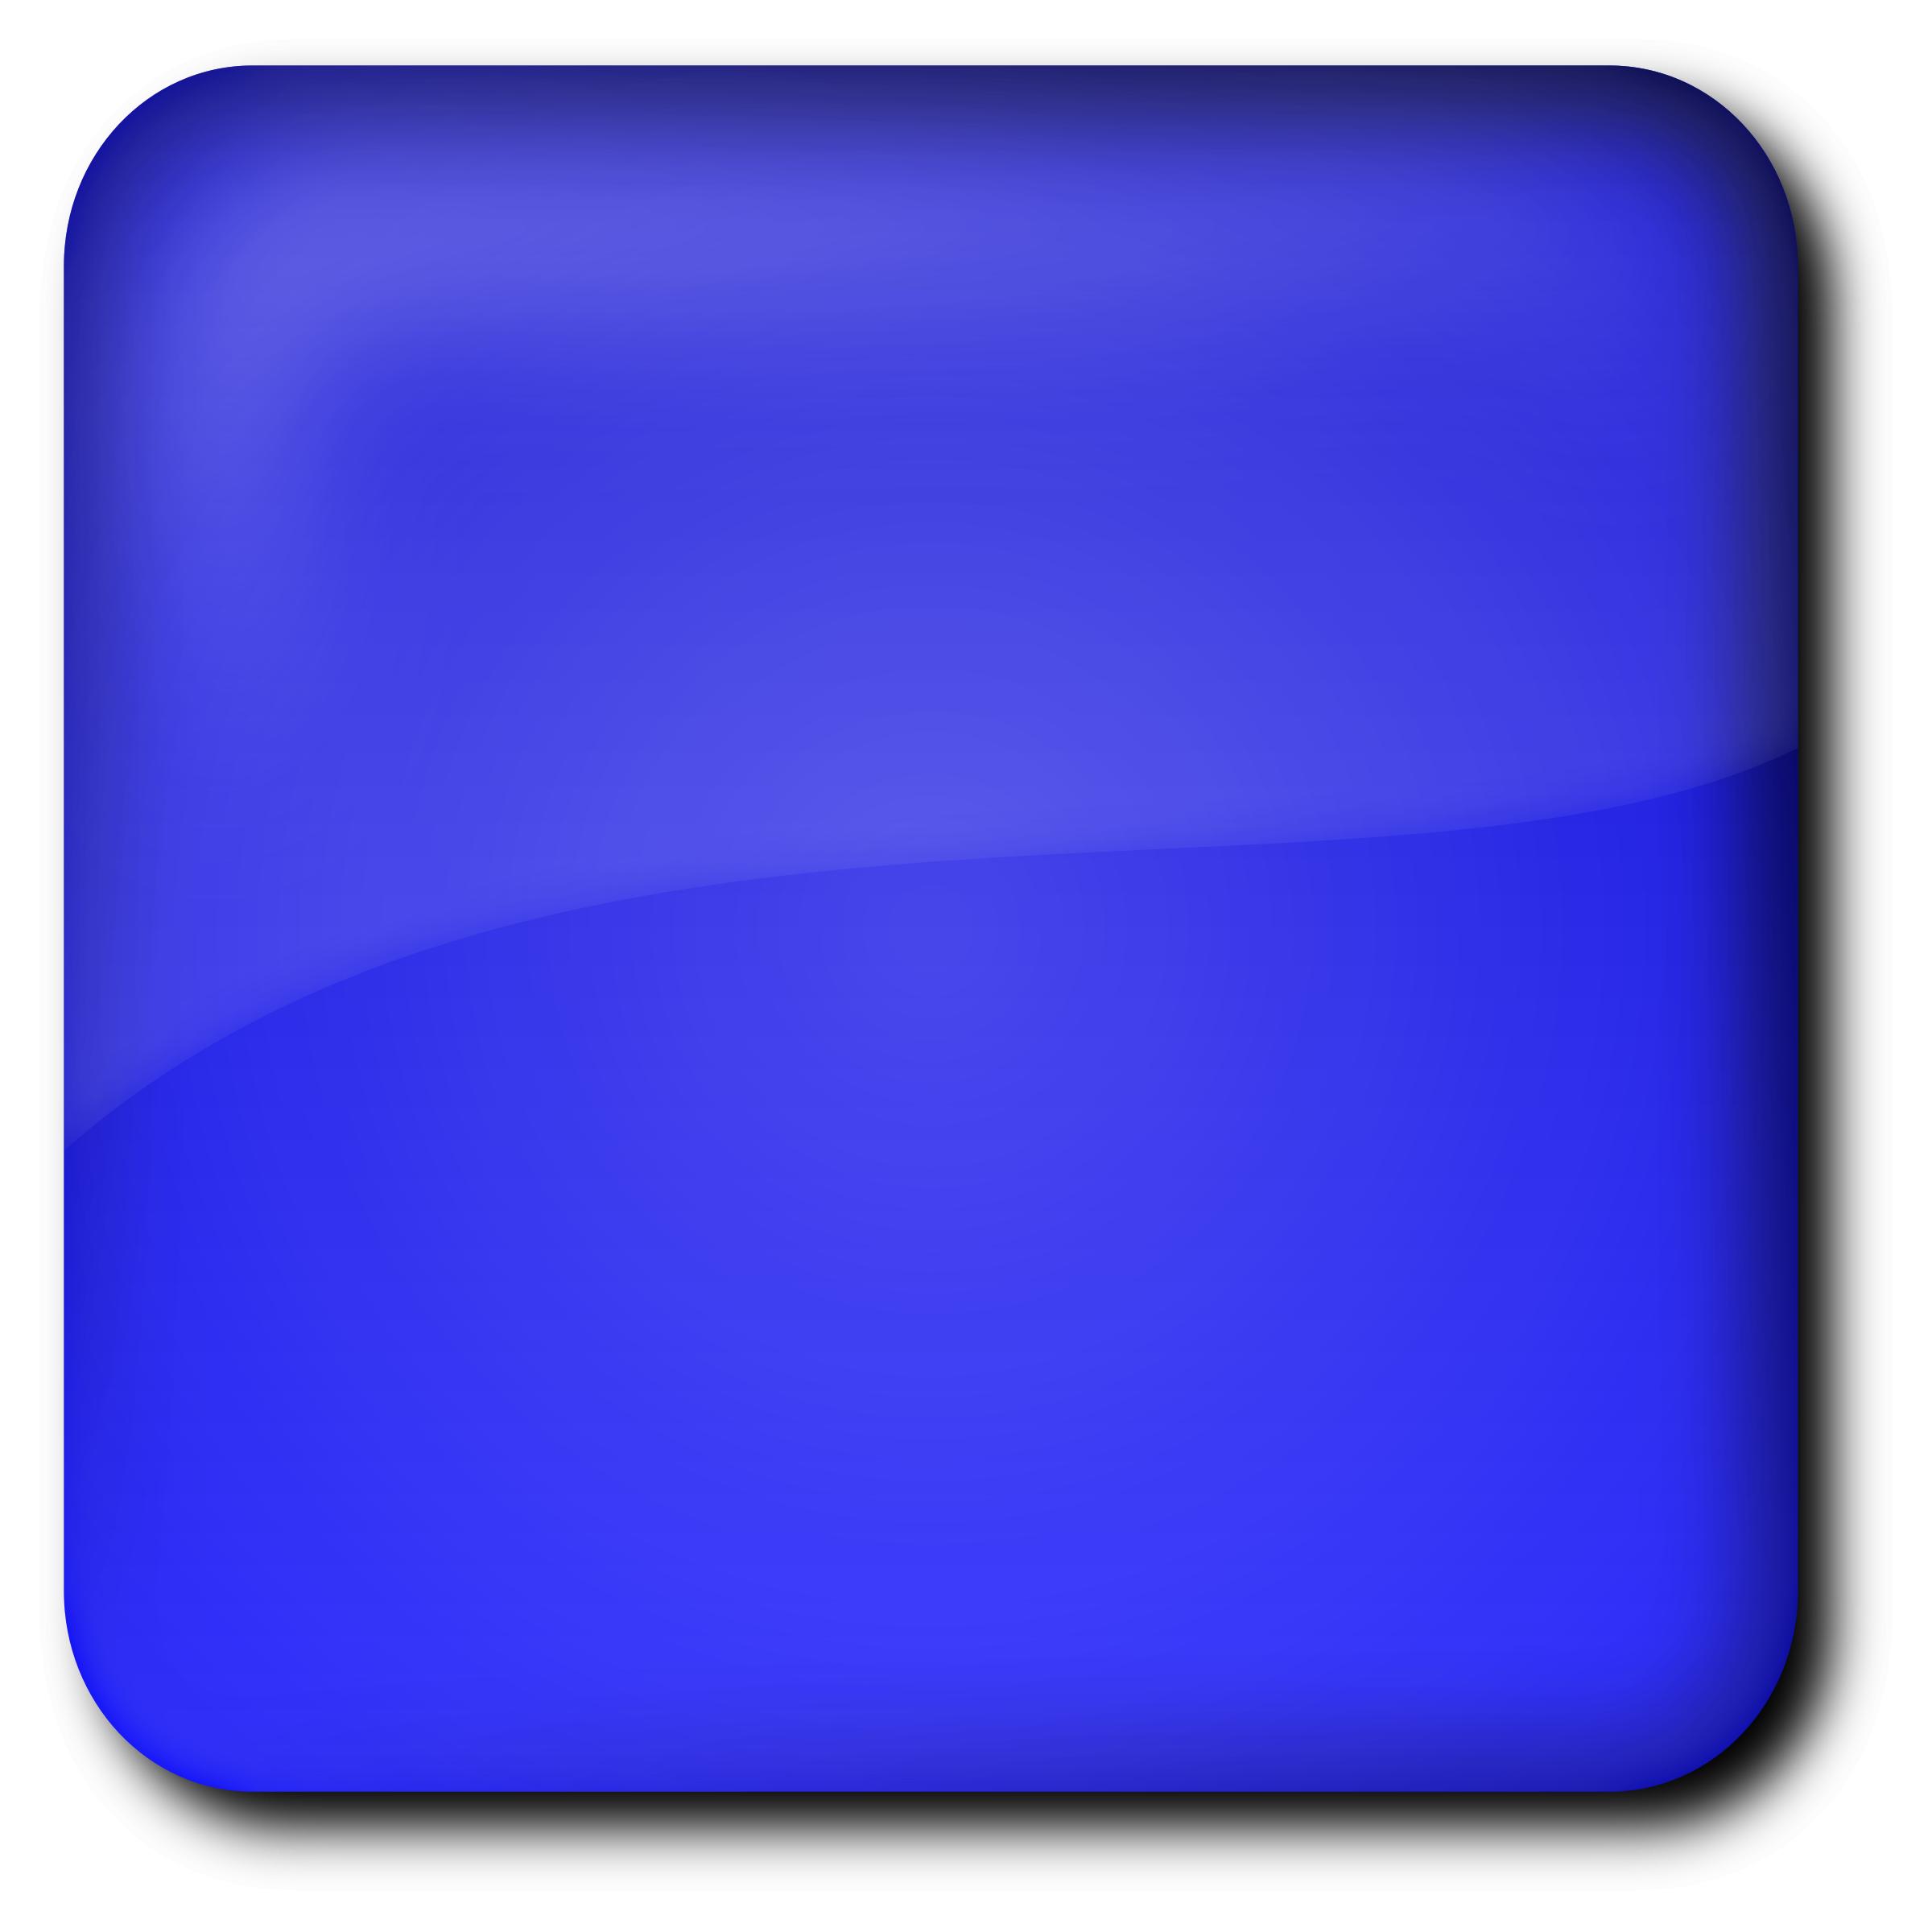 Custom color round square button png